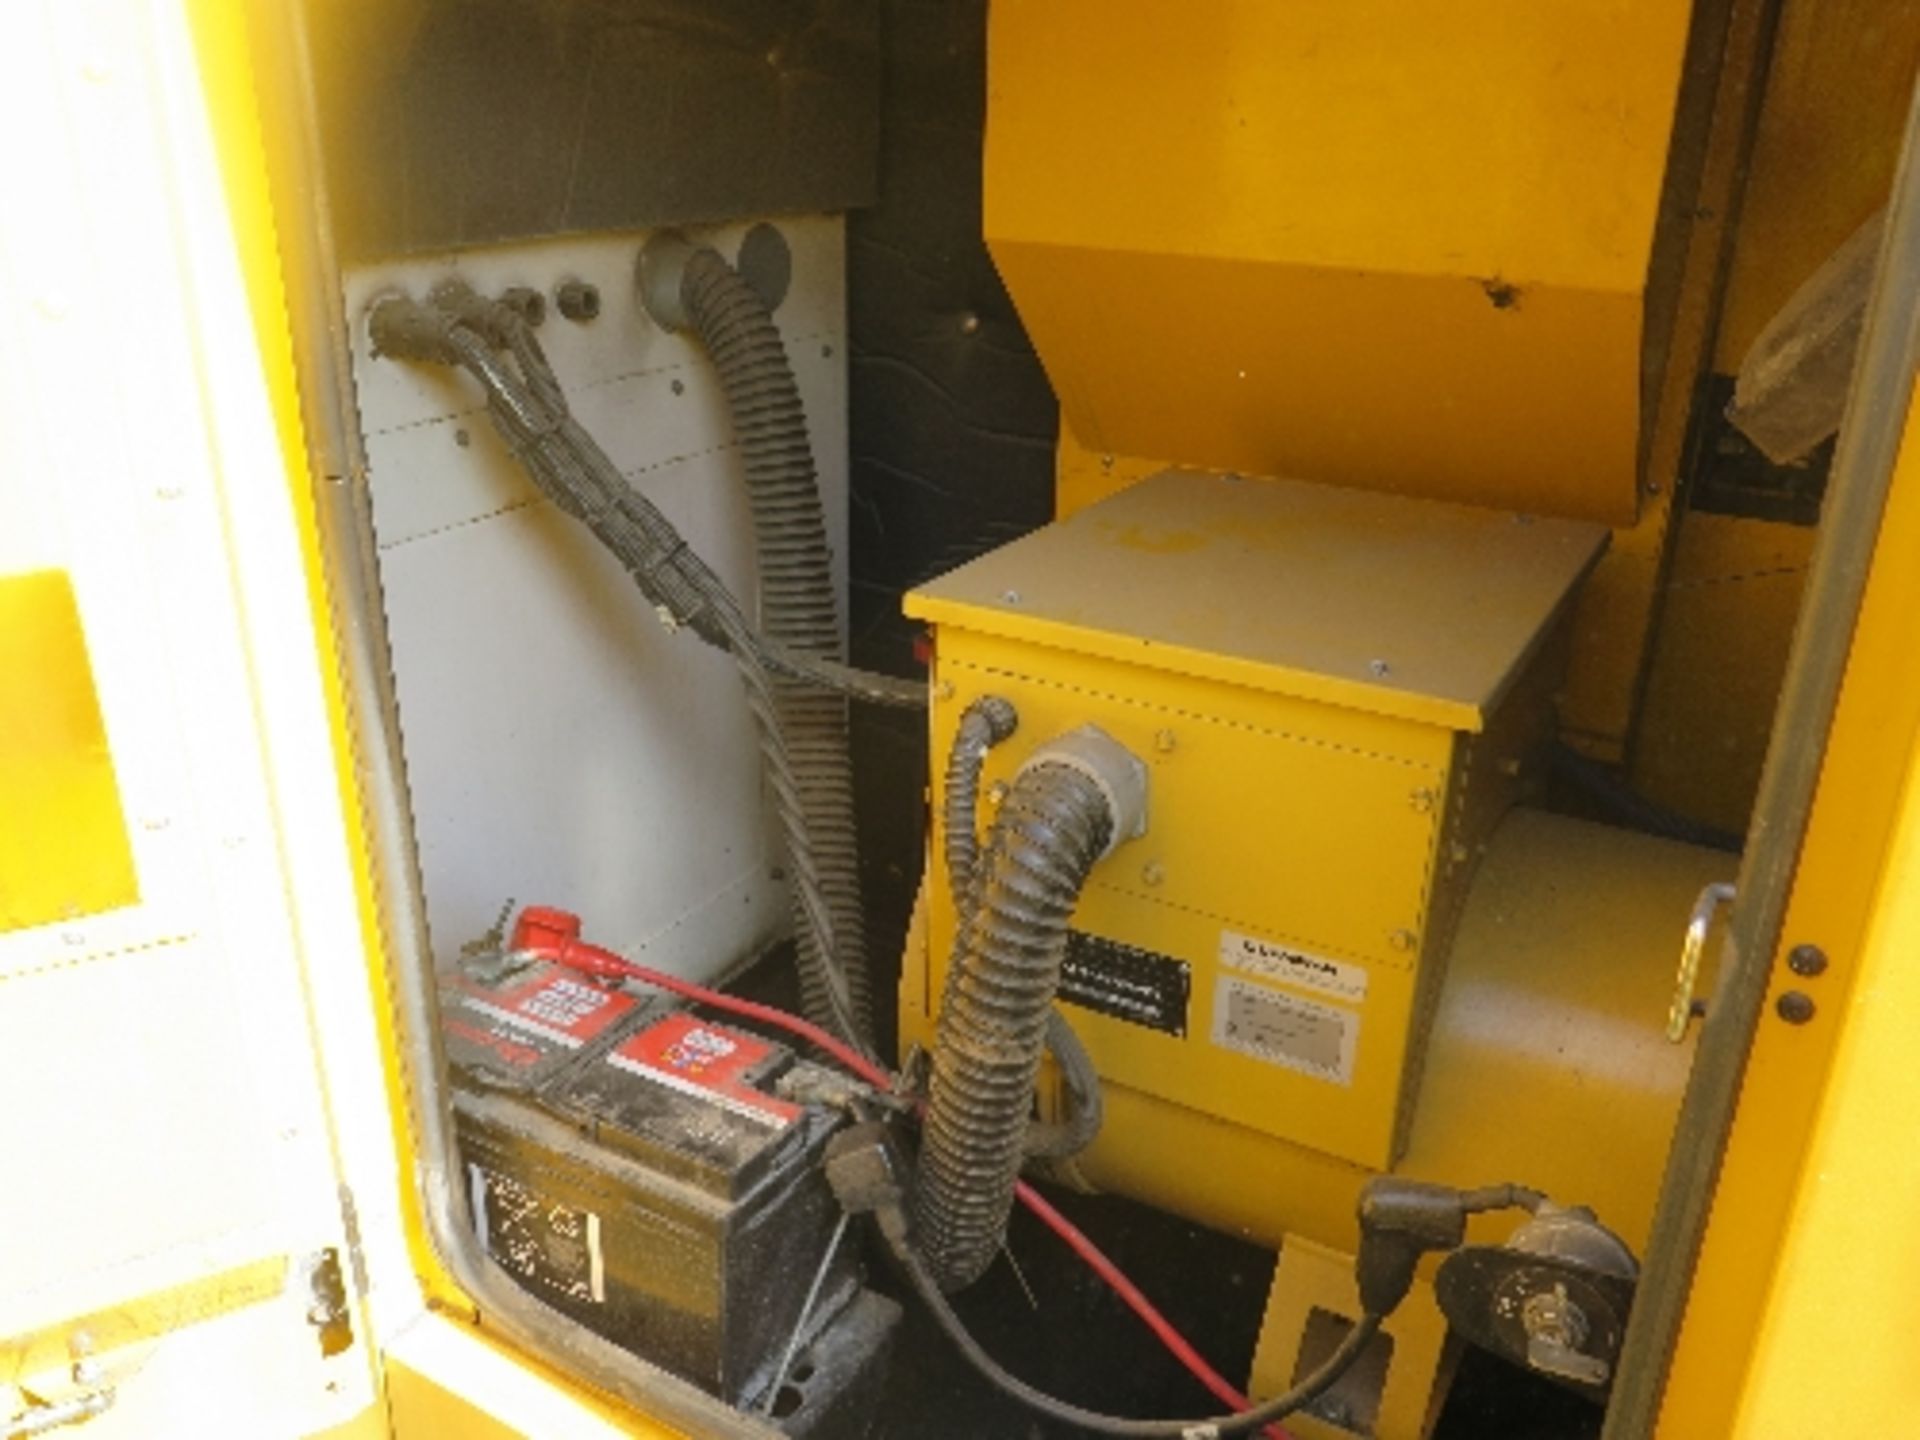 Caterpillar XQE80 generator 17821 hrs 5003858
PERKINS POWER - RUNS AND MAKES POWER
ALL LOTS are - Image 5 of 6